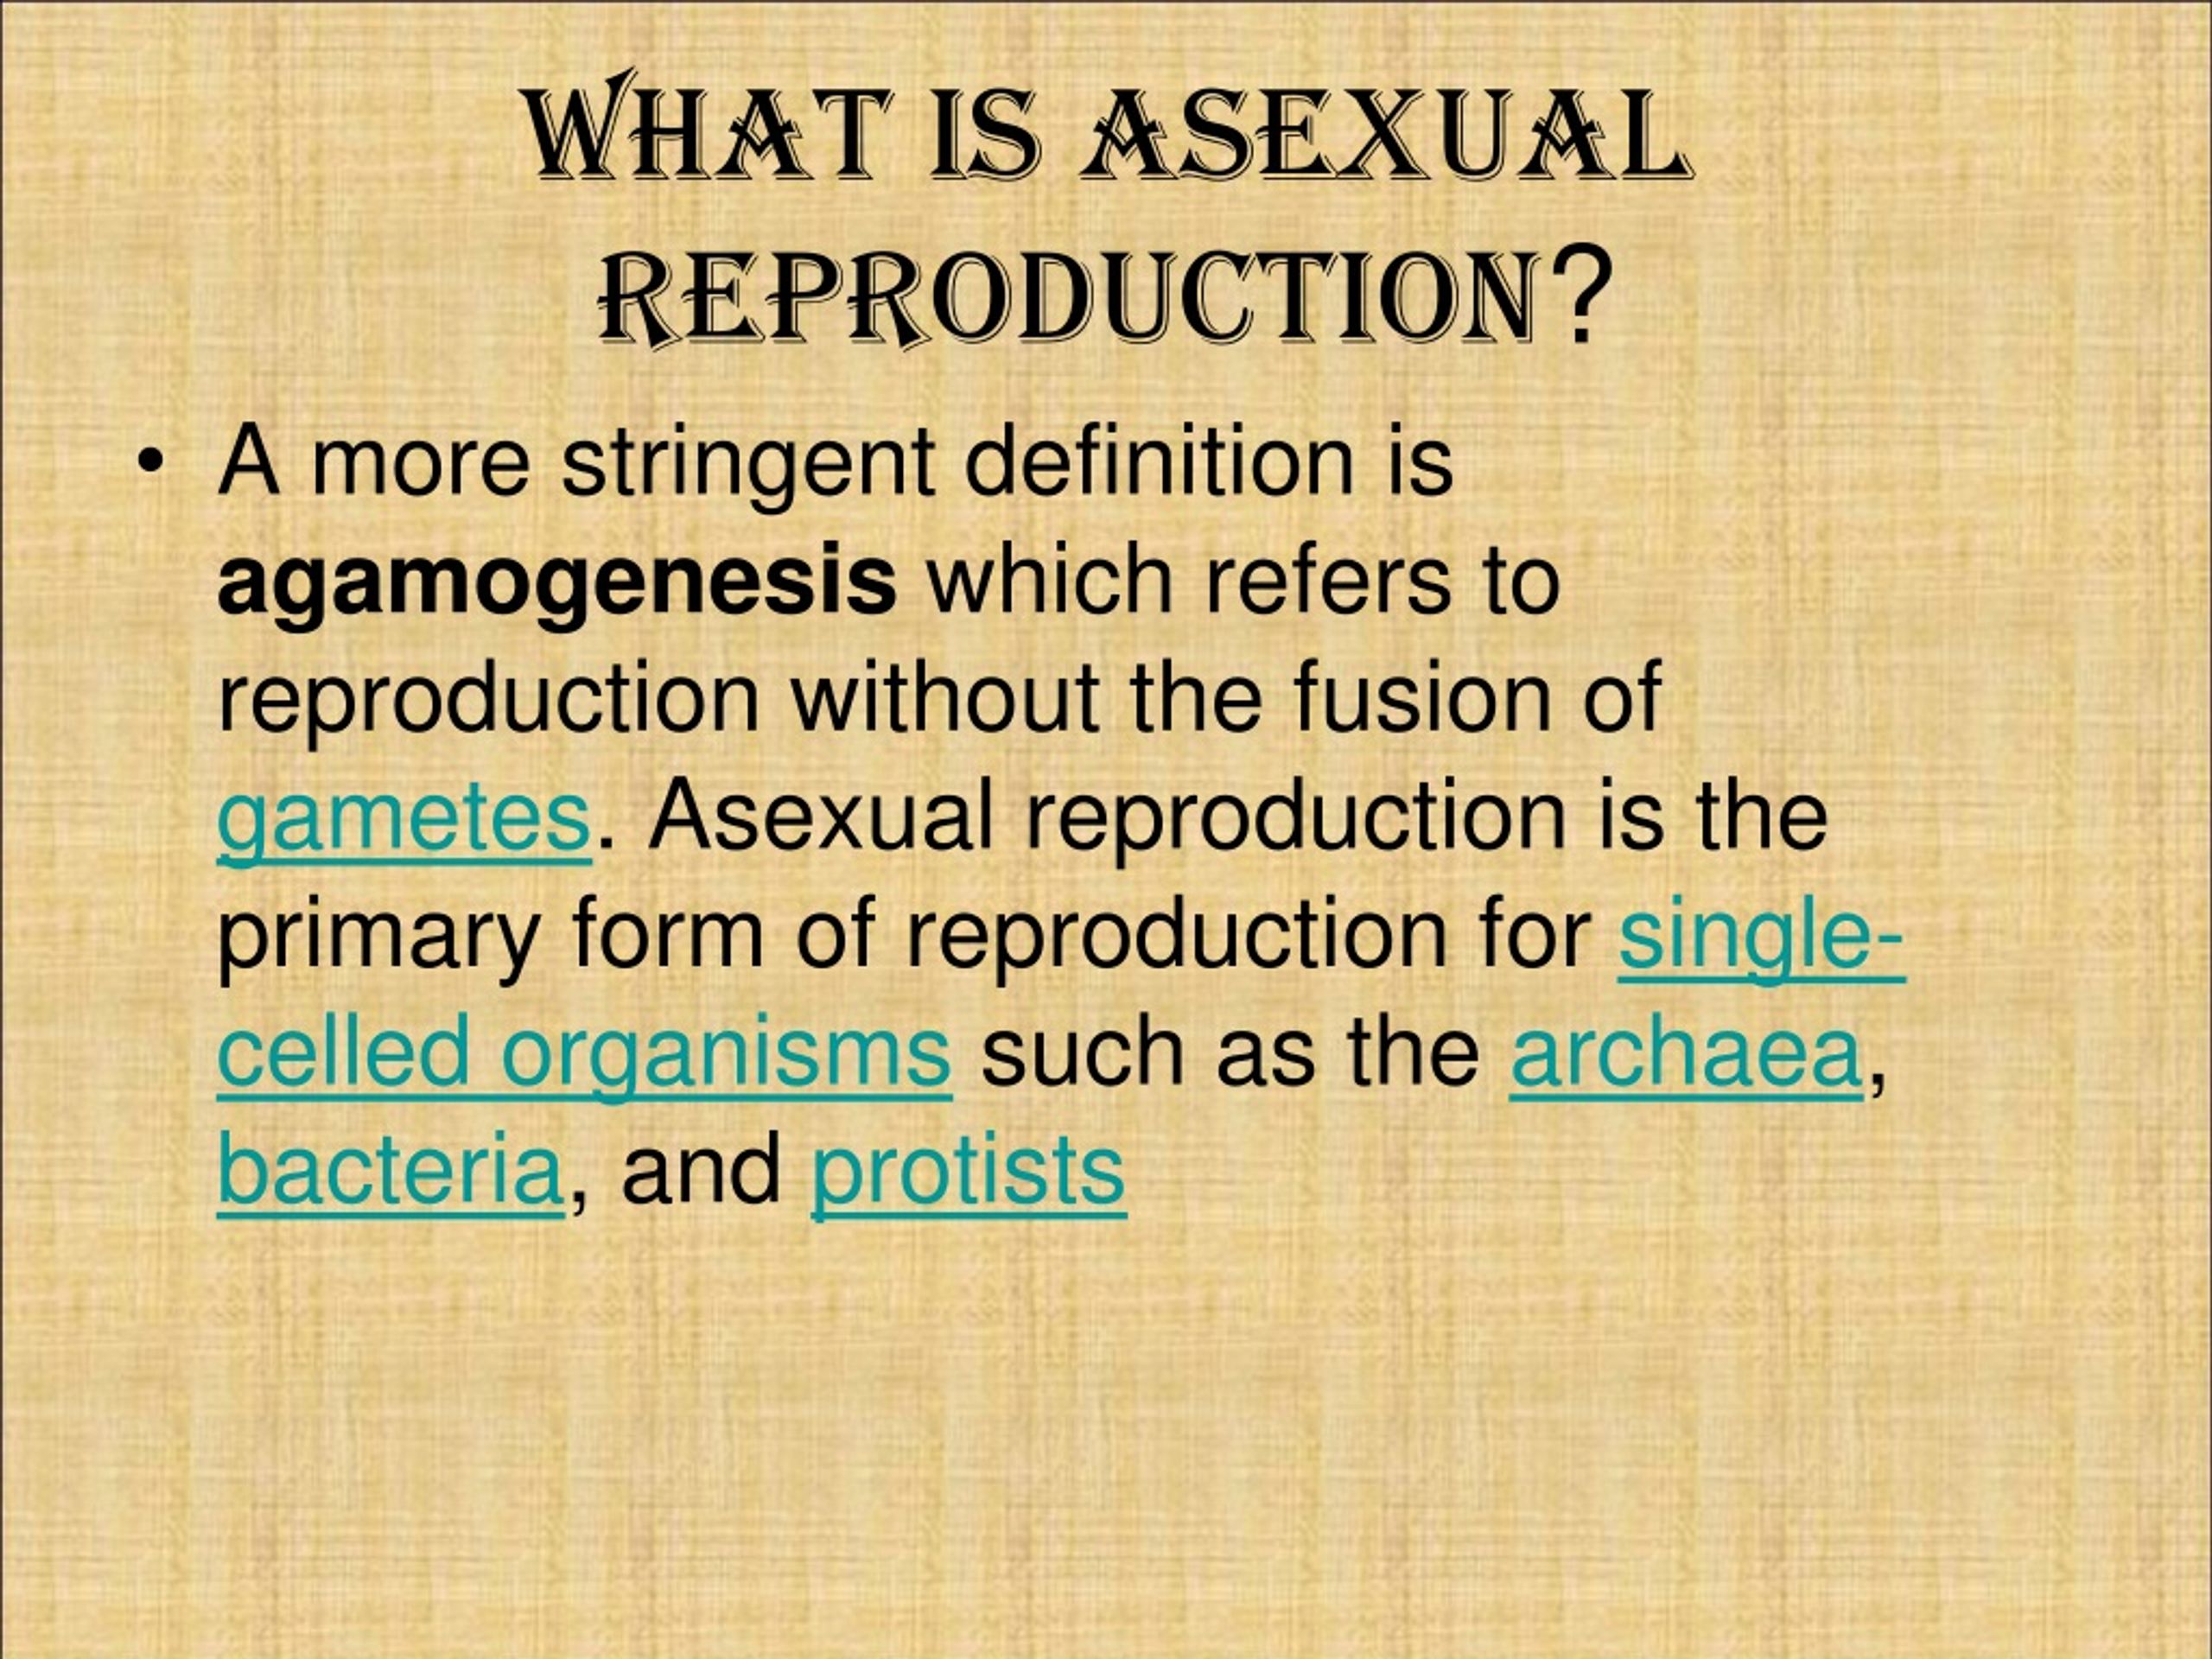 Ppt Asexual Reproduction Powerpoint Presentation Free Download Id182935 0698